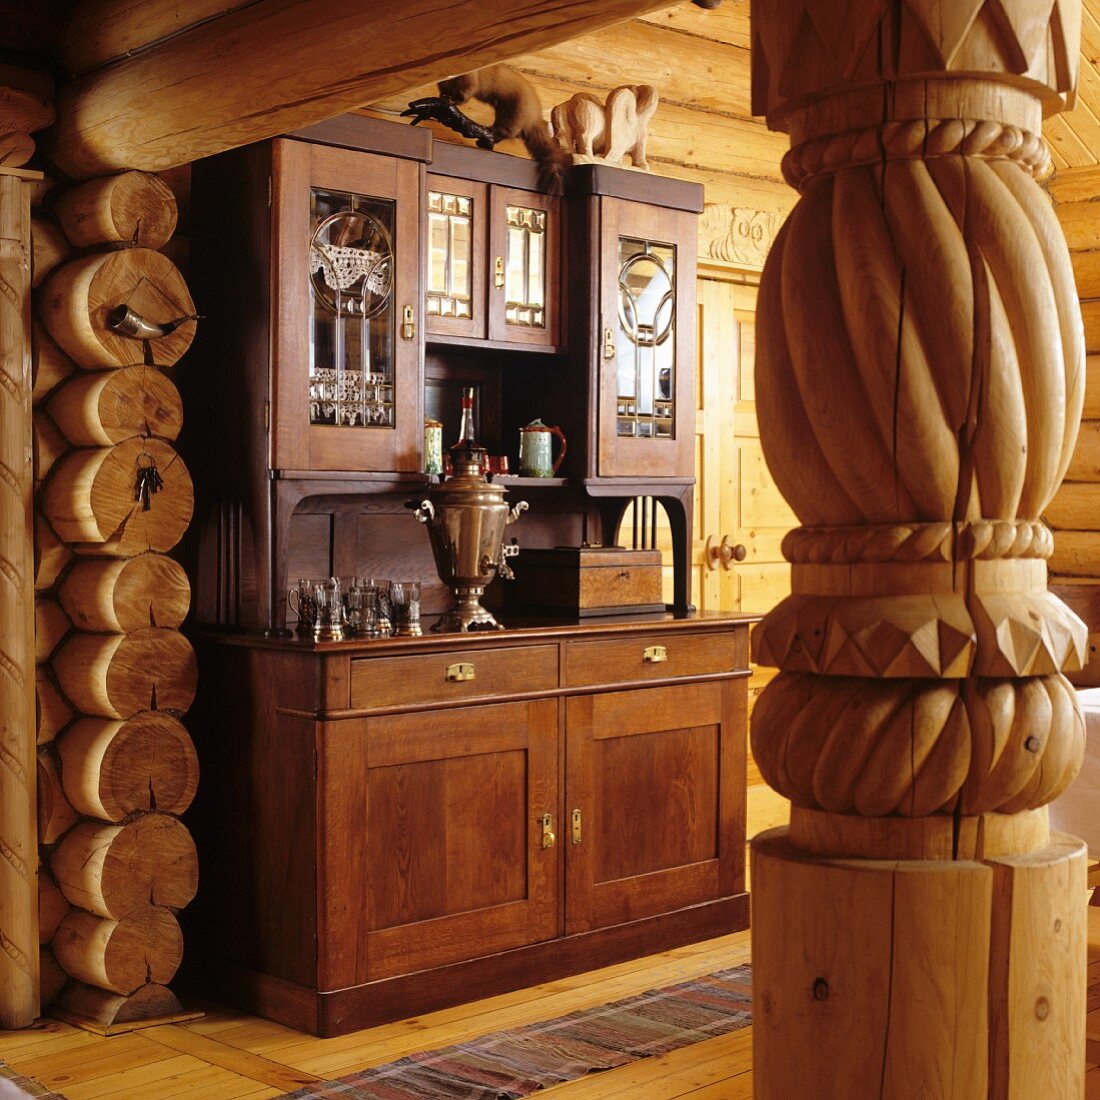 Turned wooden column in doorway with view of antique kitchen dresser in living-dining room of log cabin